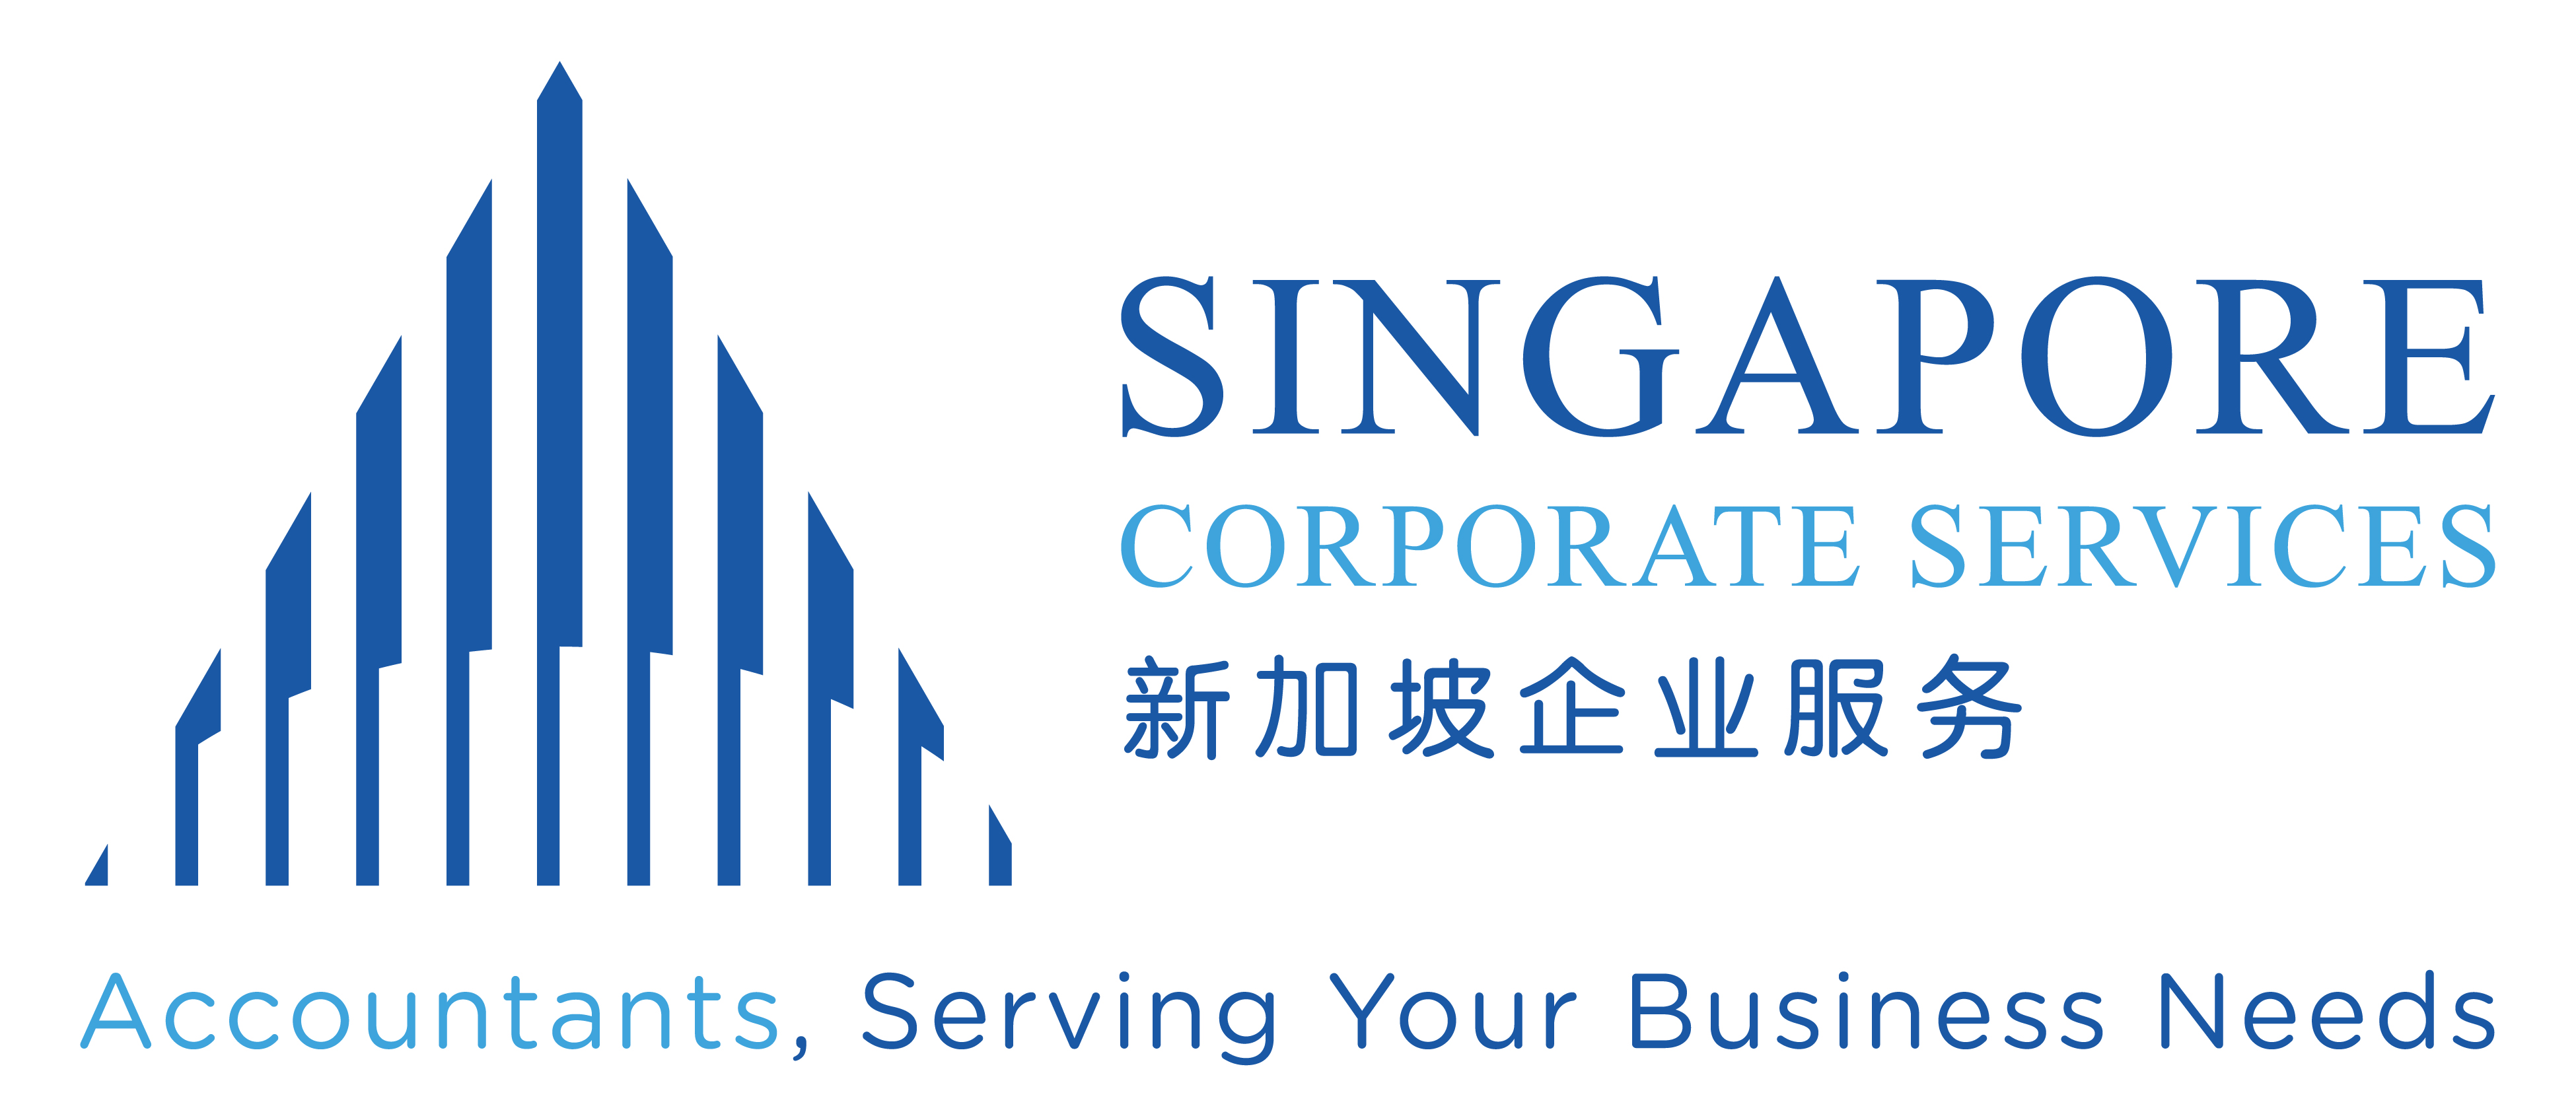 Singapore Corporate Services (M) Sdn Bhd